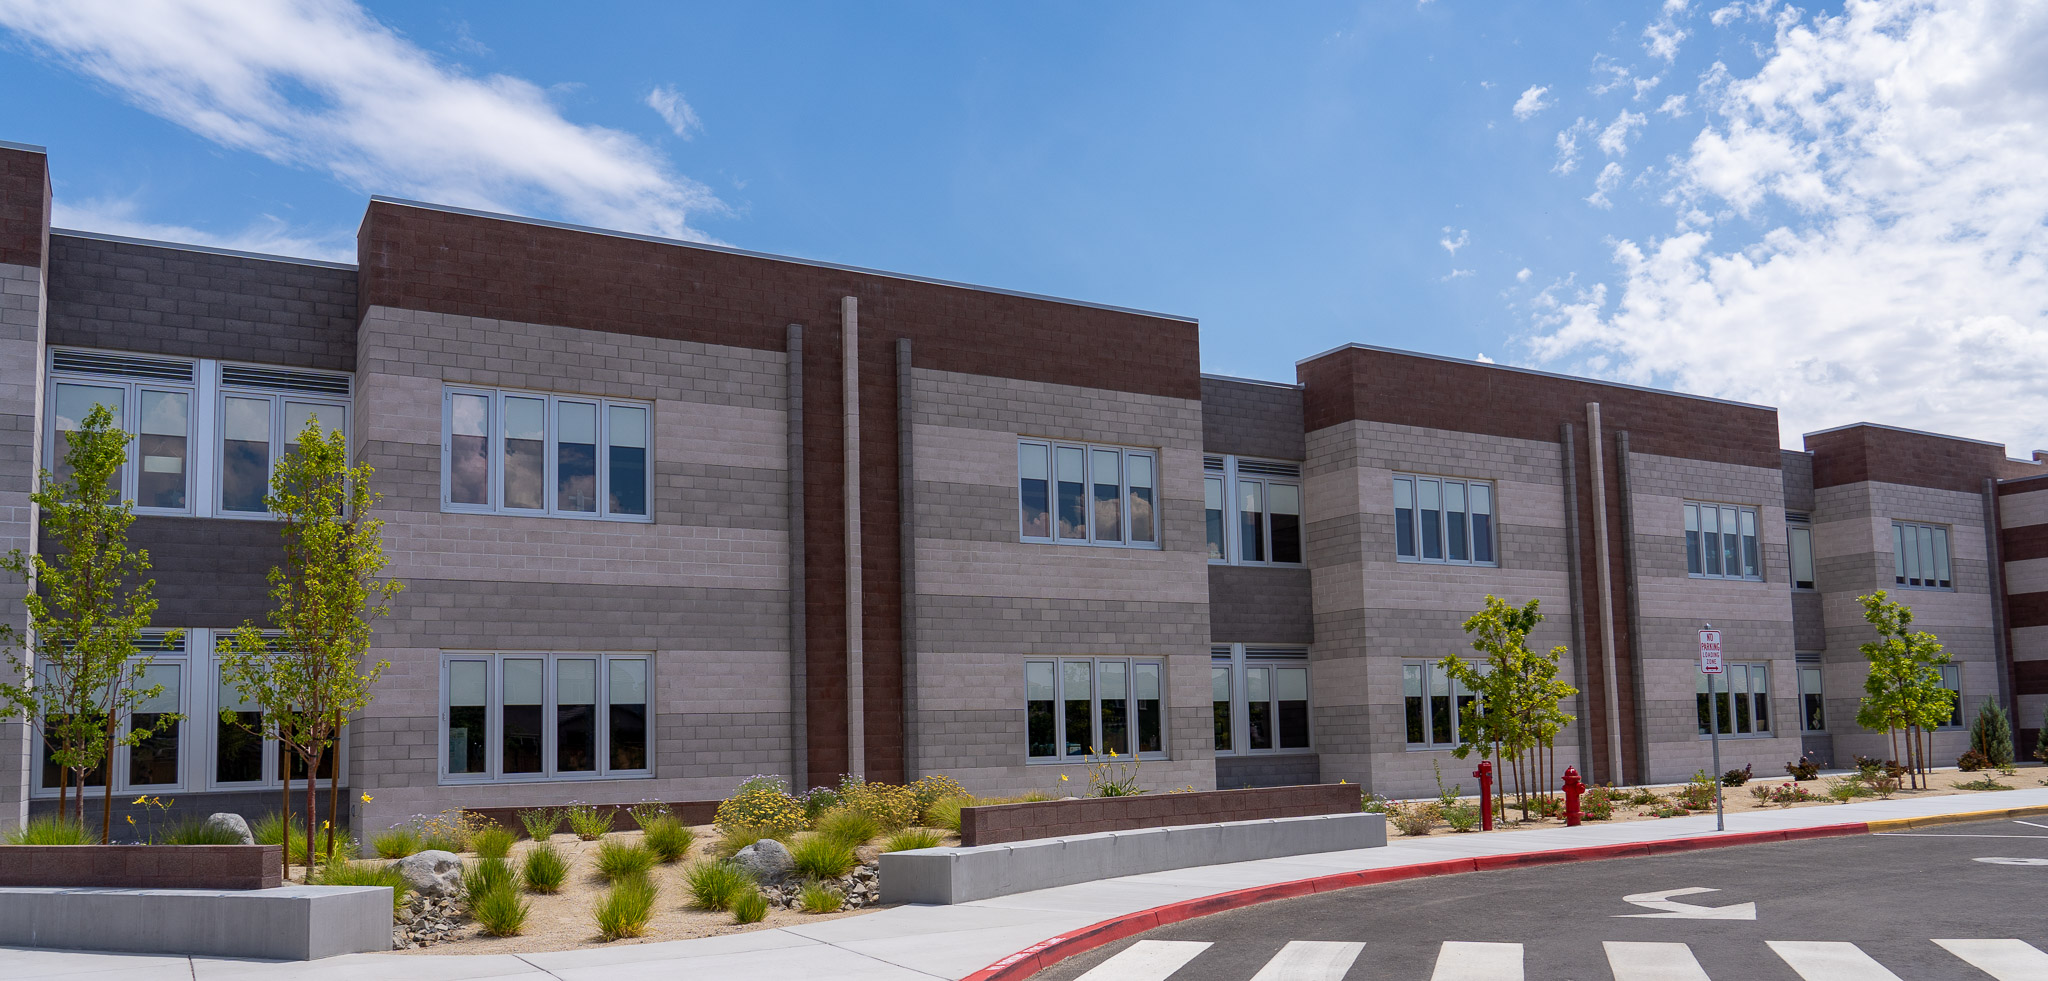 Students in the Washoe County School district in Reno, Nevada benefit from the abundant natural light conditions in multiple ways 